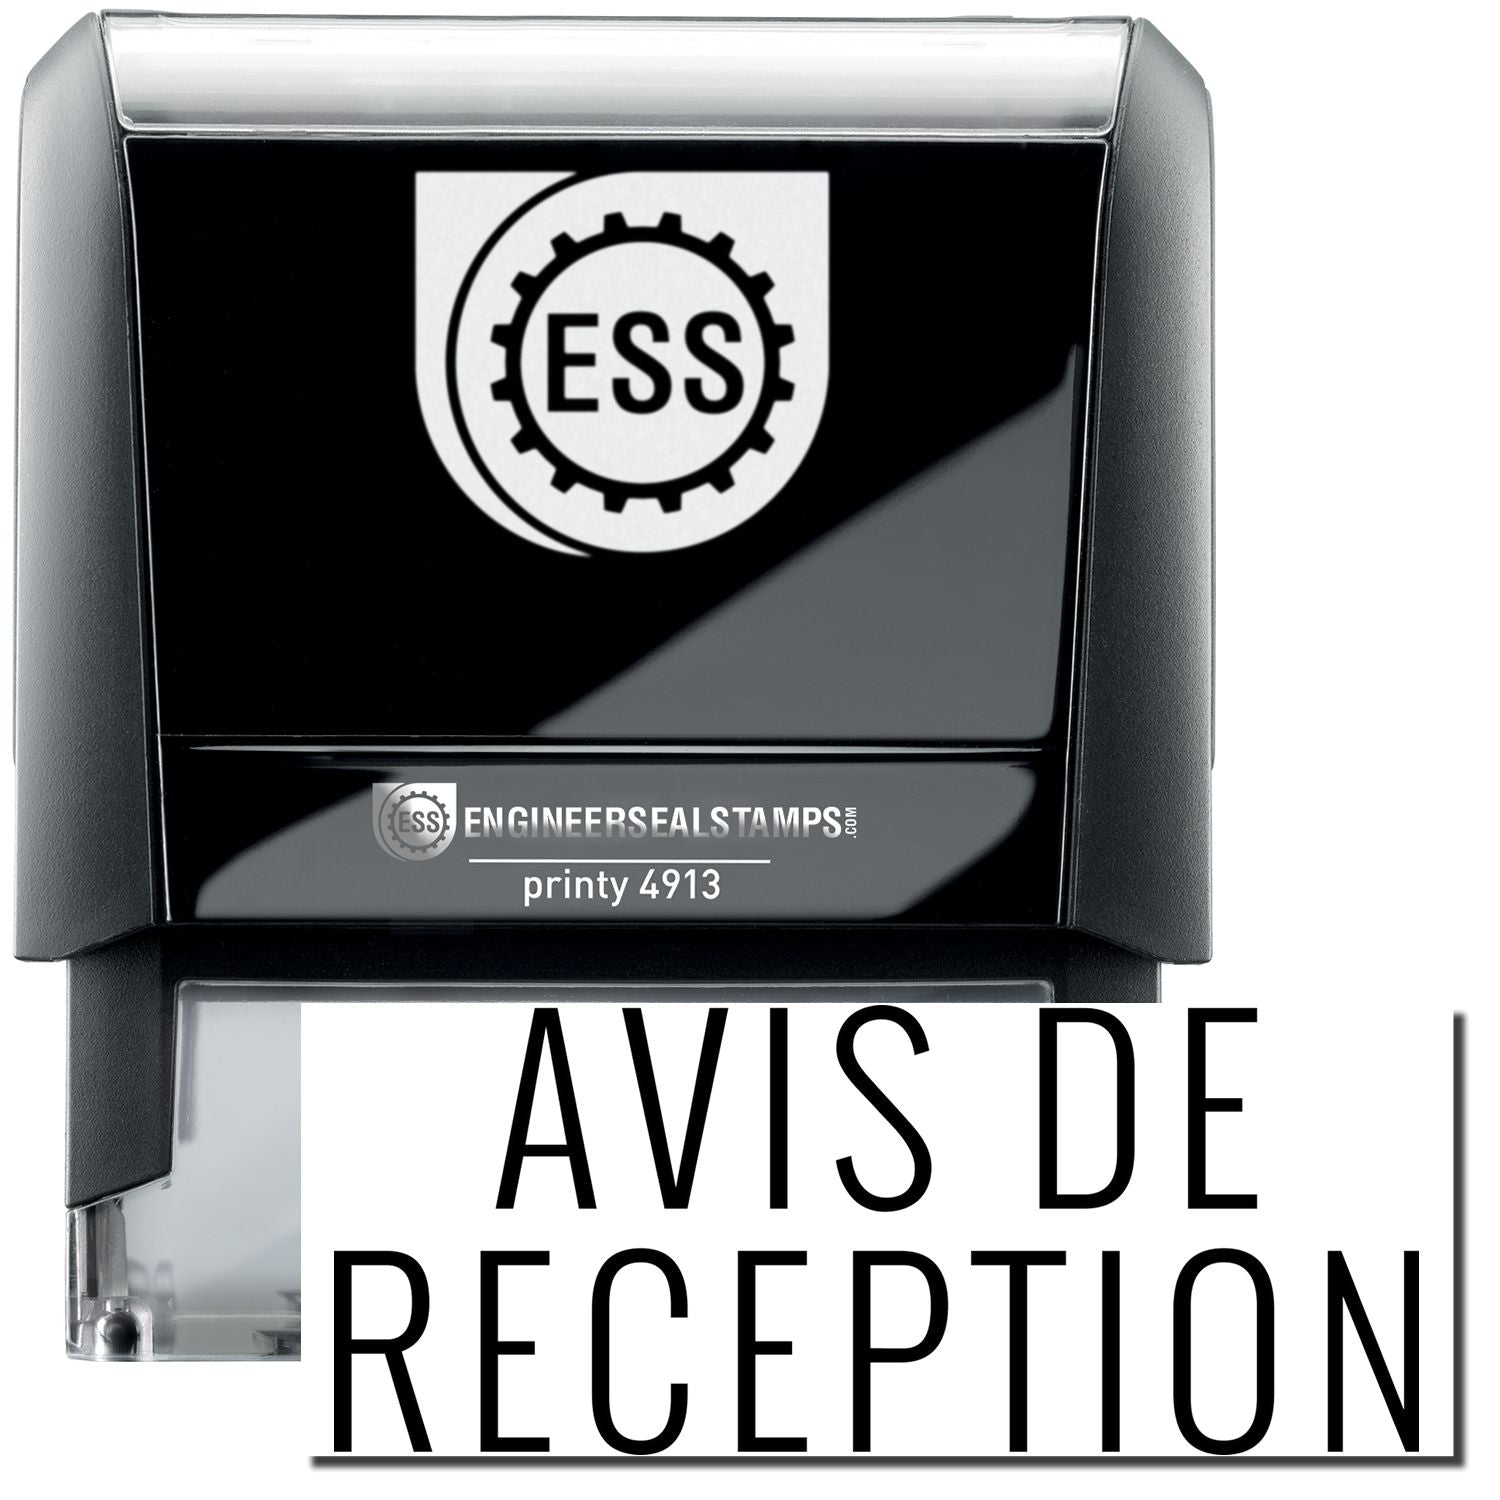 A self-inking stamp with a stamped image showing how the text "AVIS DE RECEPTION" in a large font is displayed by it after stamping.